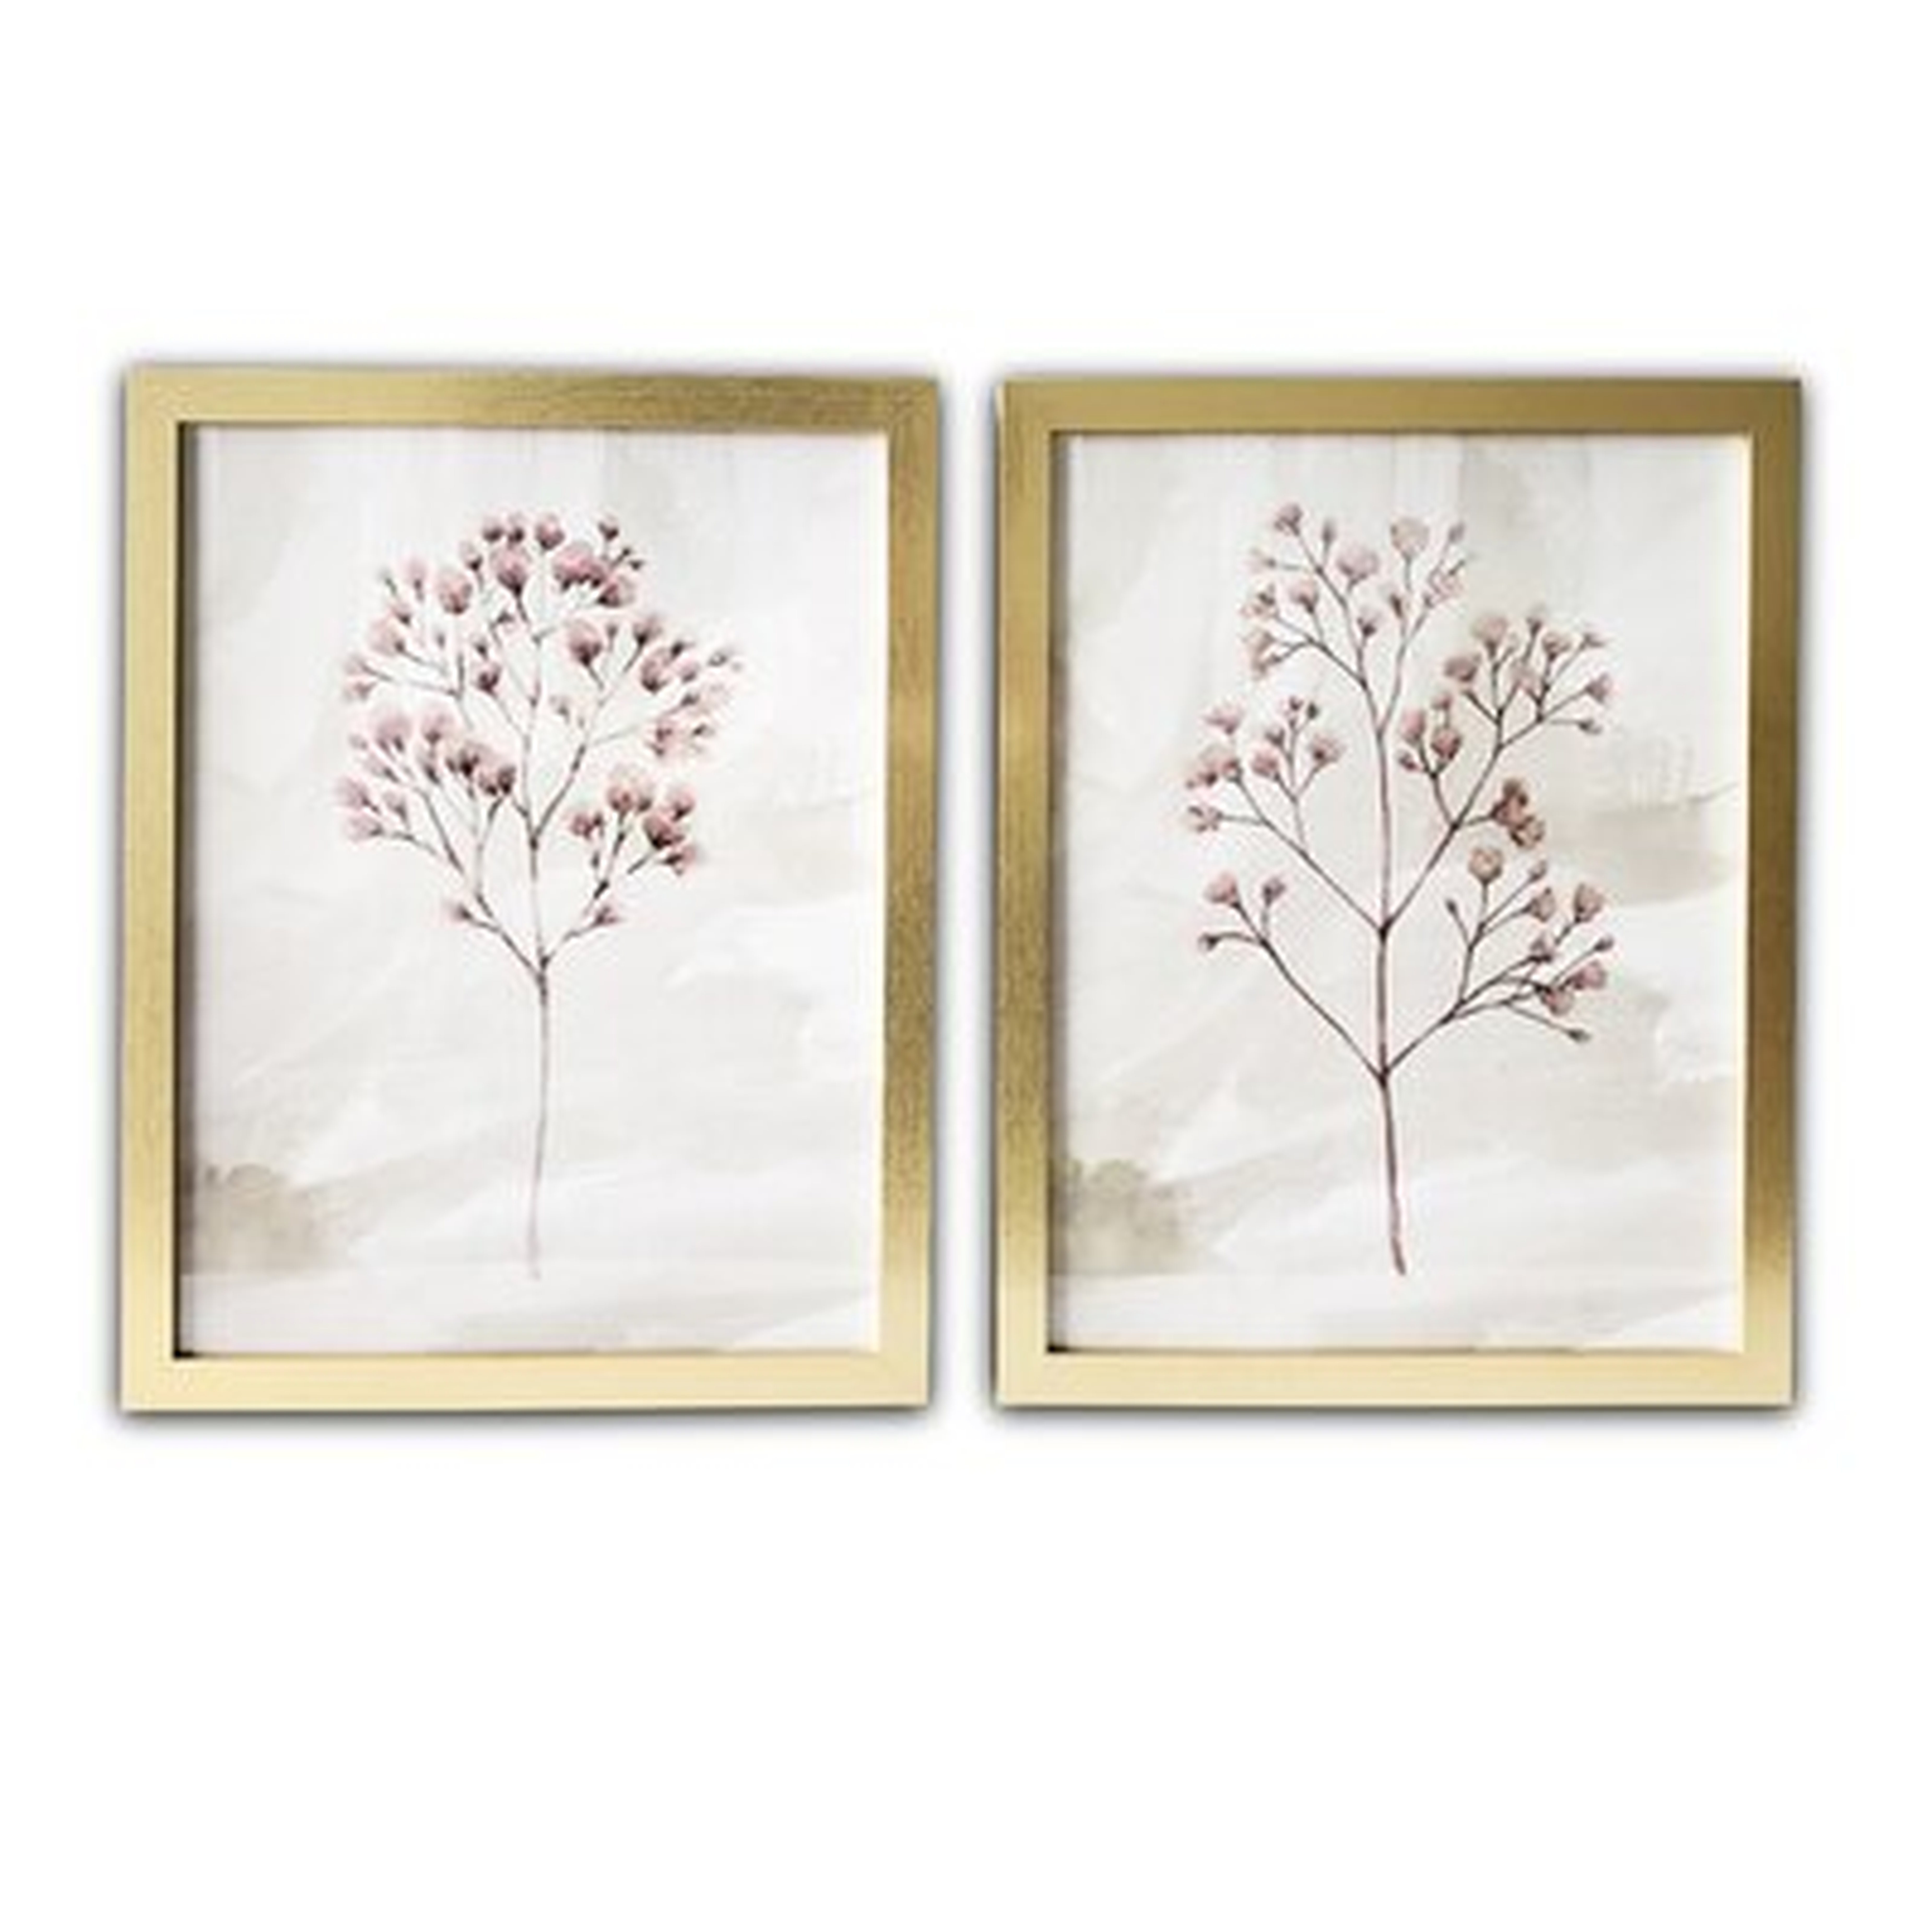 Blush Branches - 2 Piece Picture Frame Painting Print Set on Paper - Wayfair